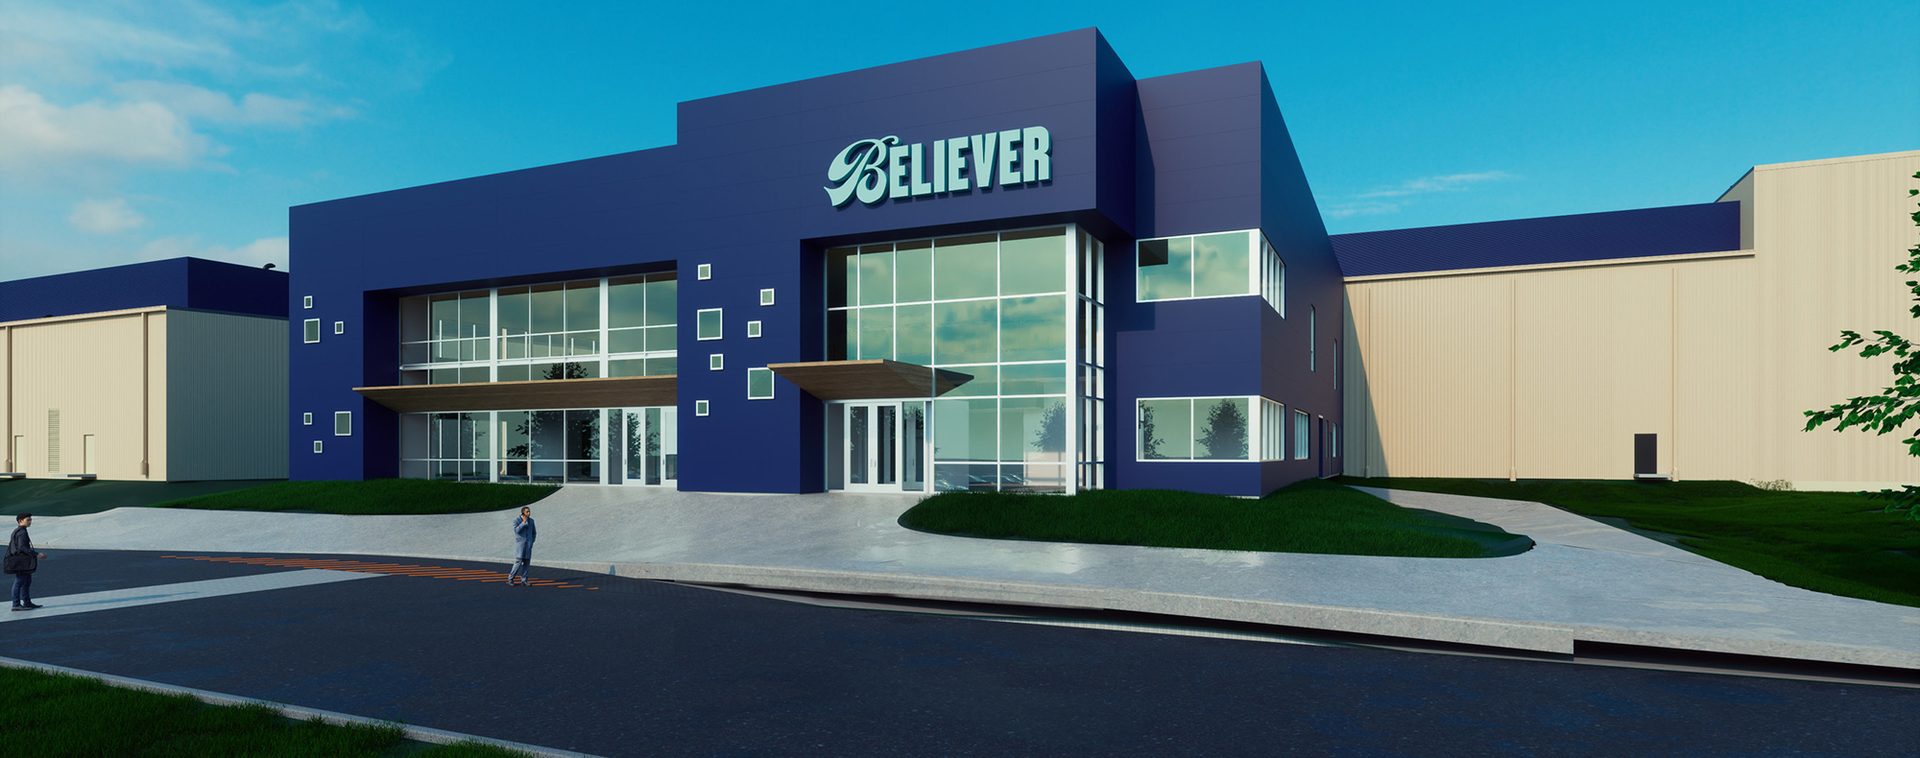 BELIEVER Meats broke ground on a 200,000-sq.-ft. cultivated meat facility